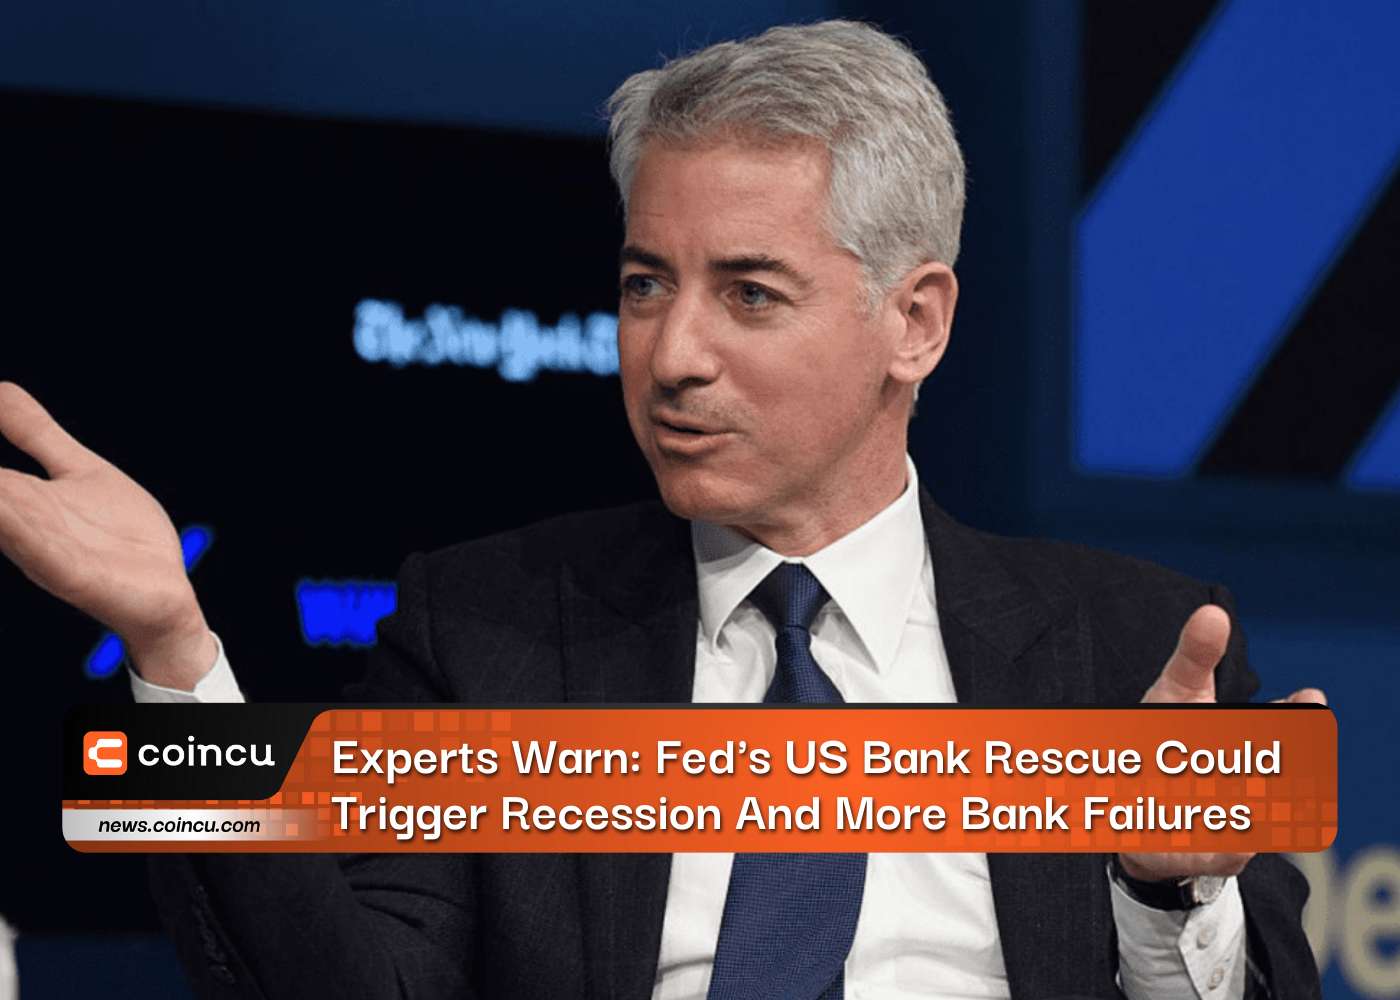 Experts Warn: Fed's US Bank Rescue Could Trigger Recession And More Bank Failures